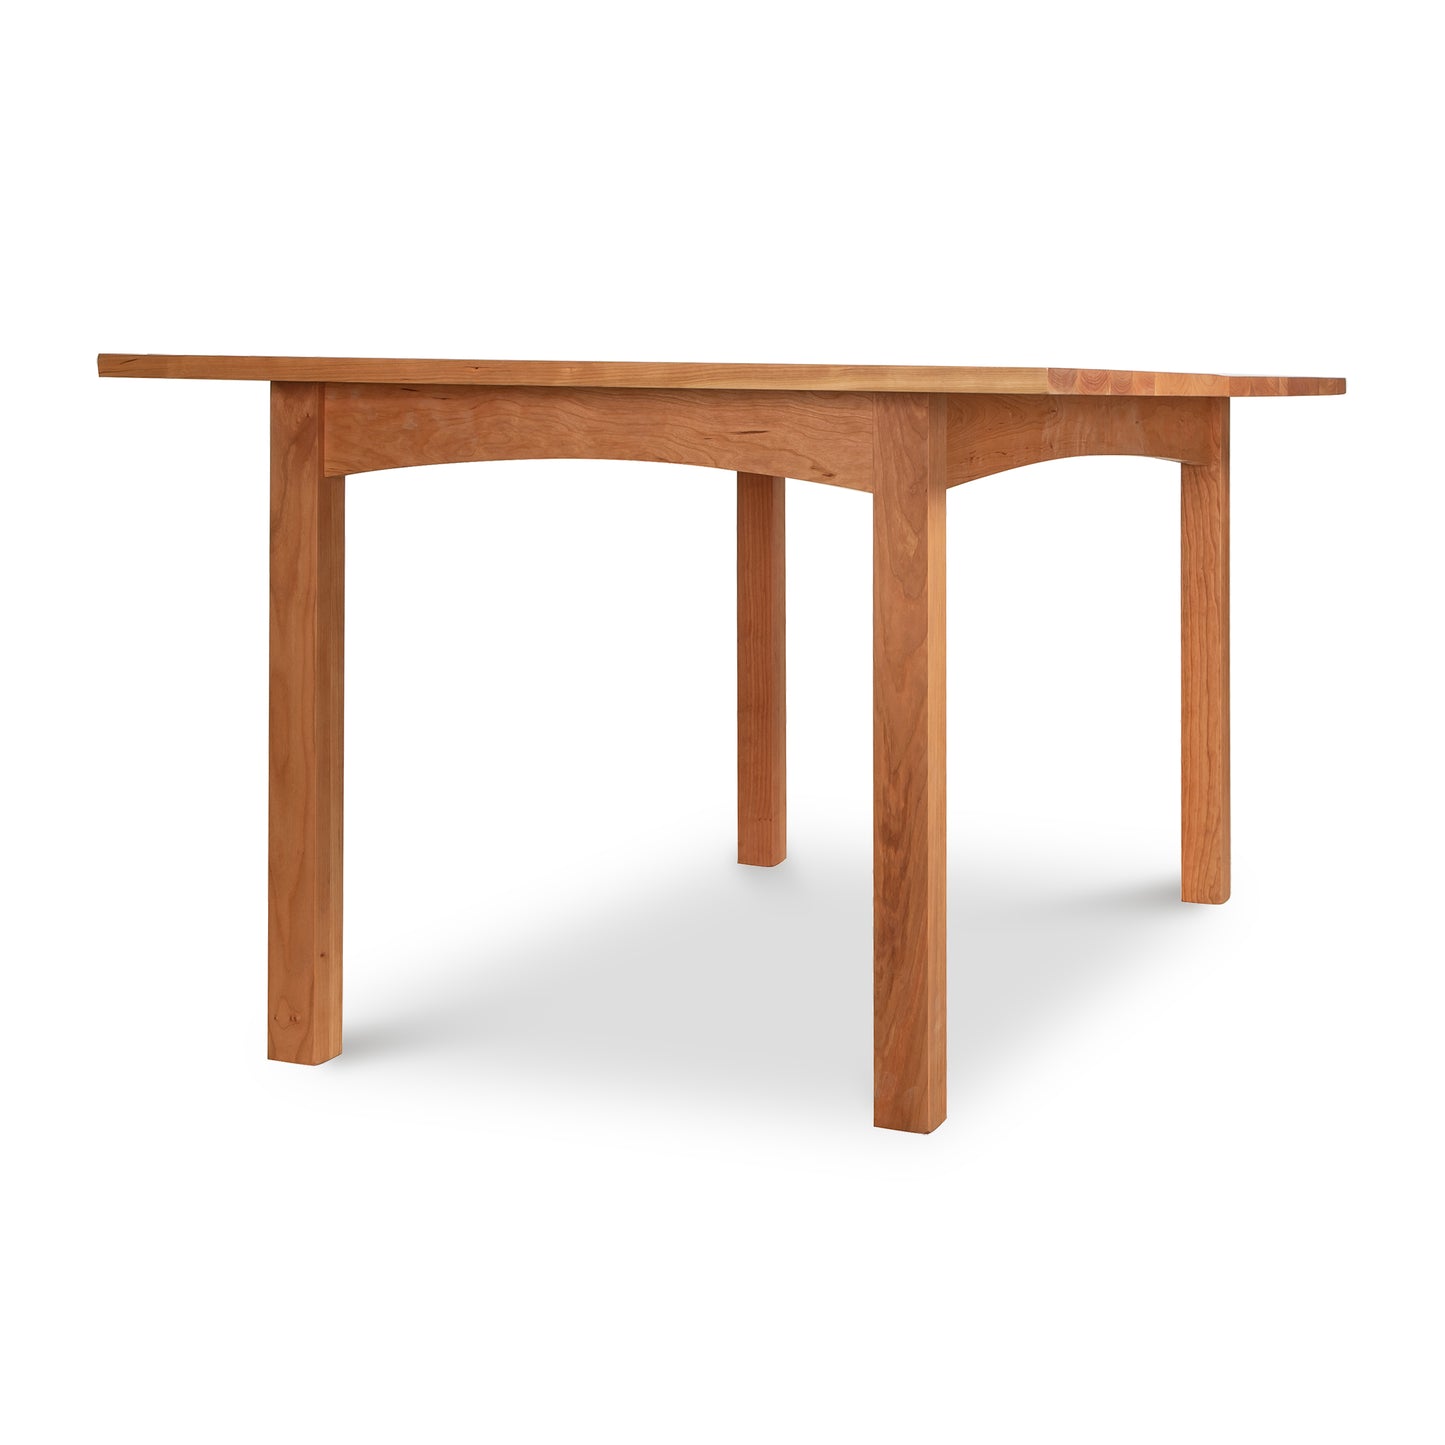 Wooden table with a simple design, featuring four straight legs and a smooth tabletop, isolated on a white background. This is known as the Vermont Furniture Designs Burlington Shaker Solid Top Dining Table.